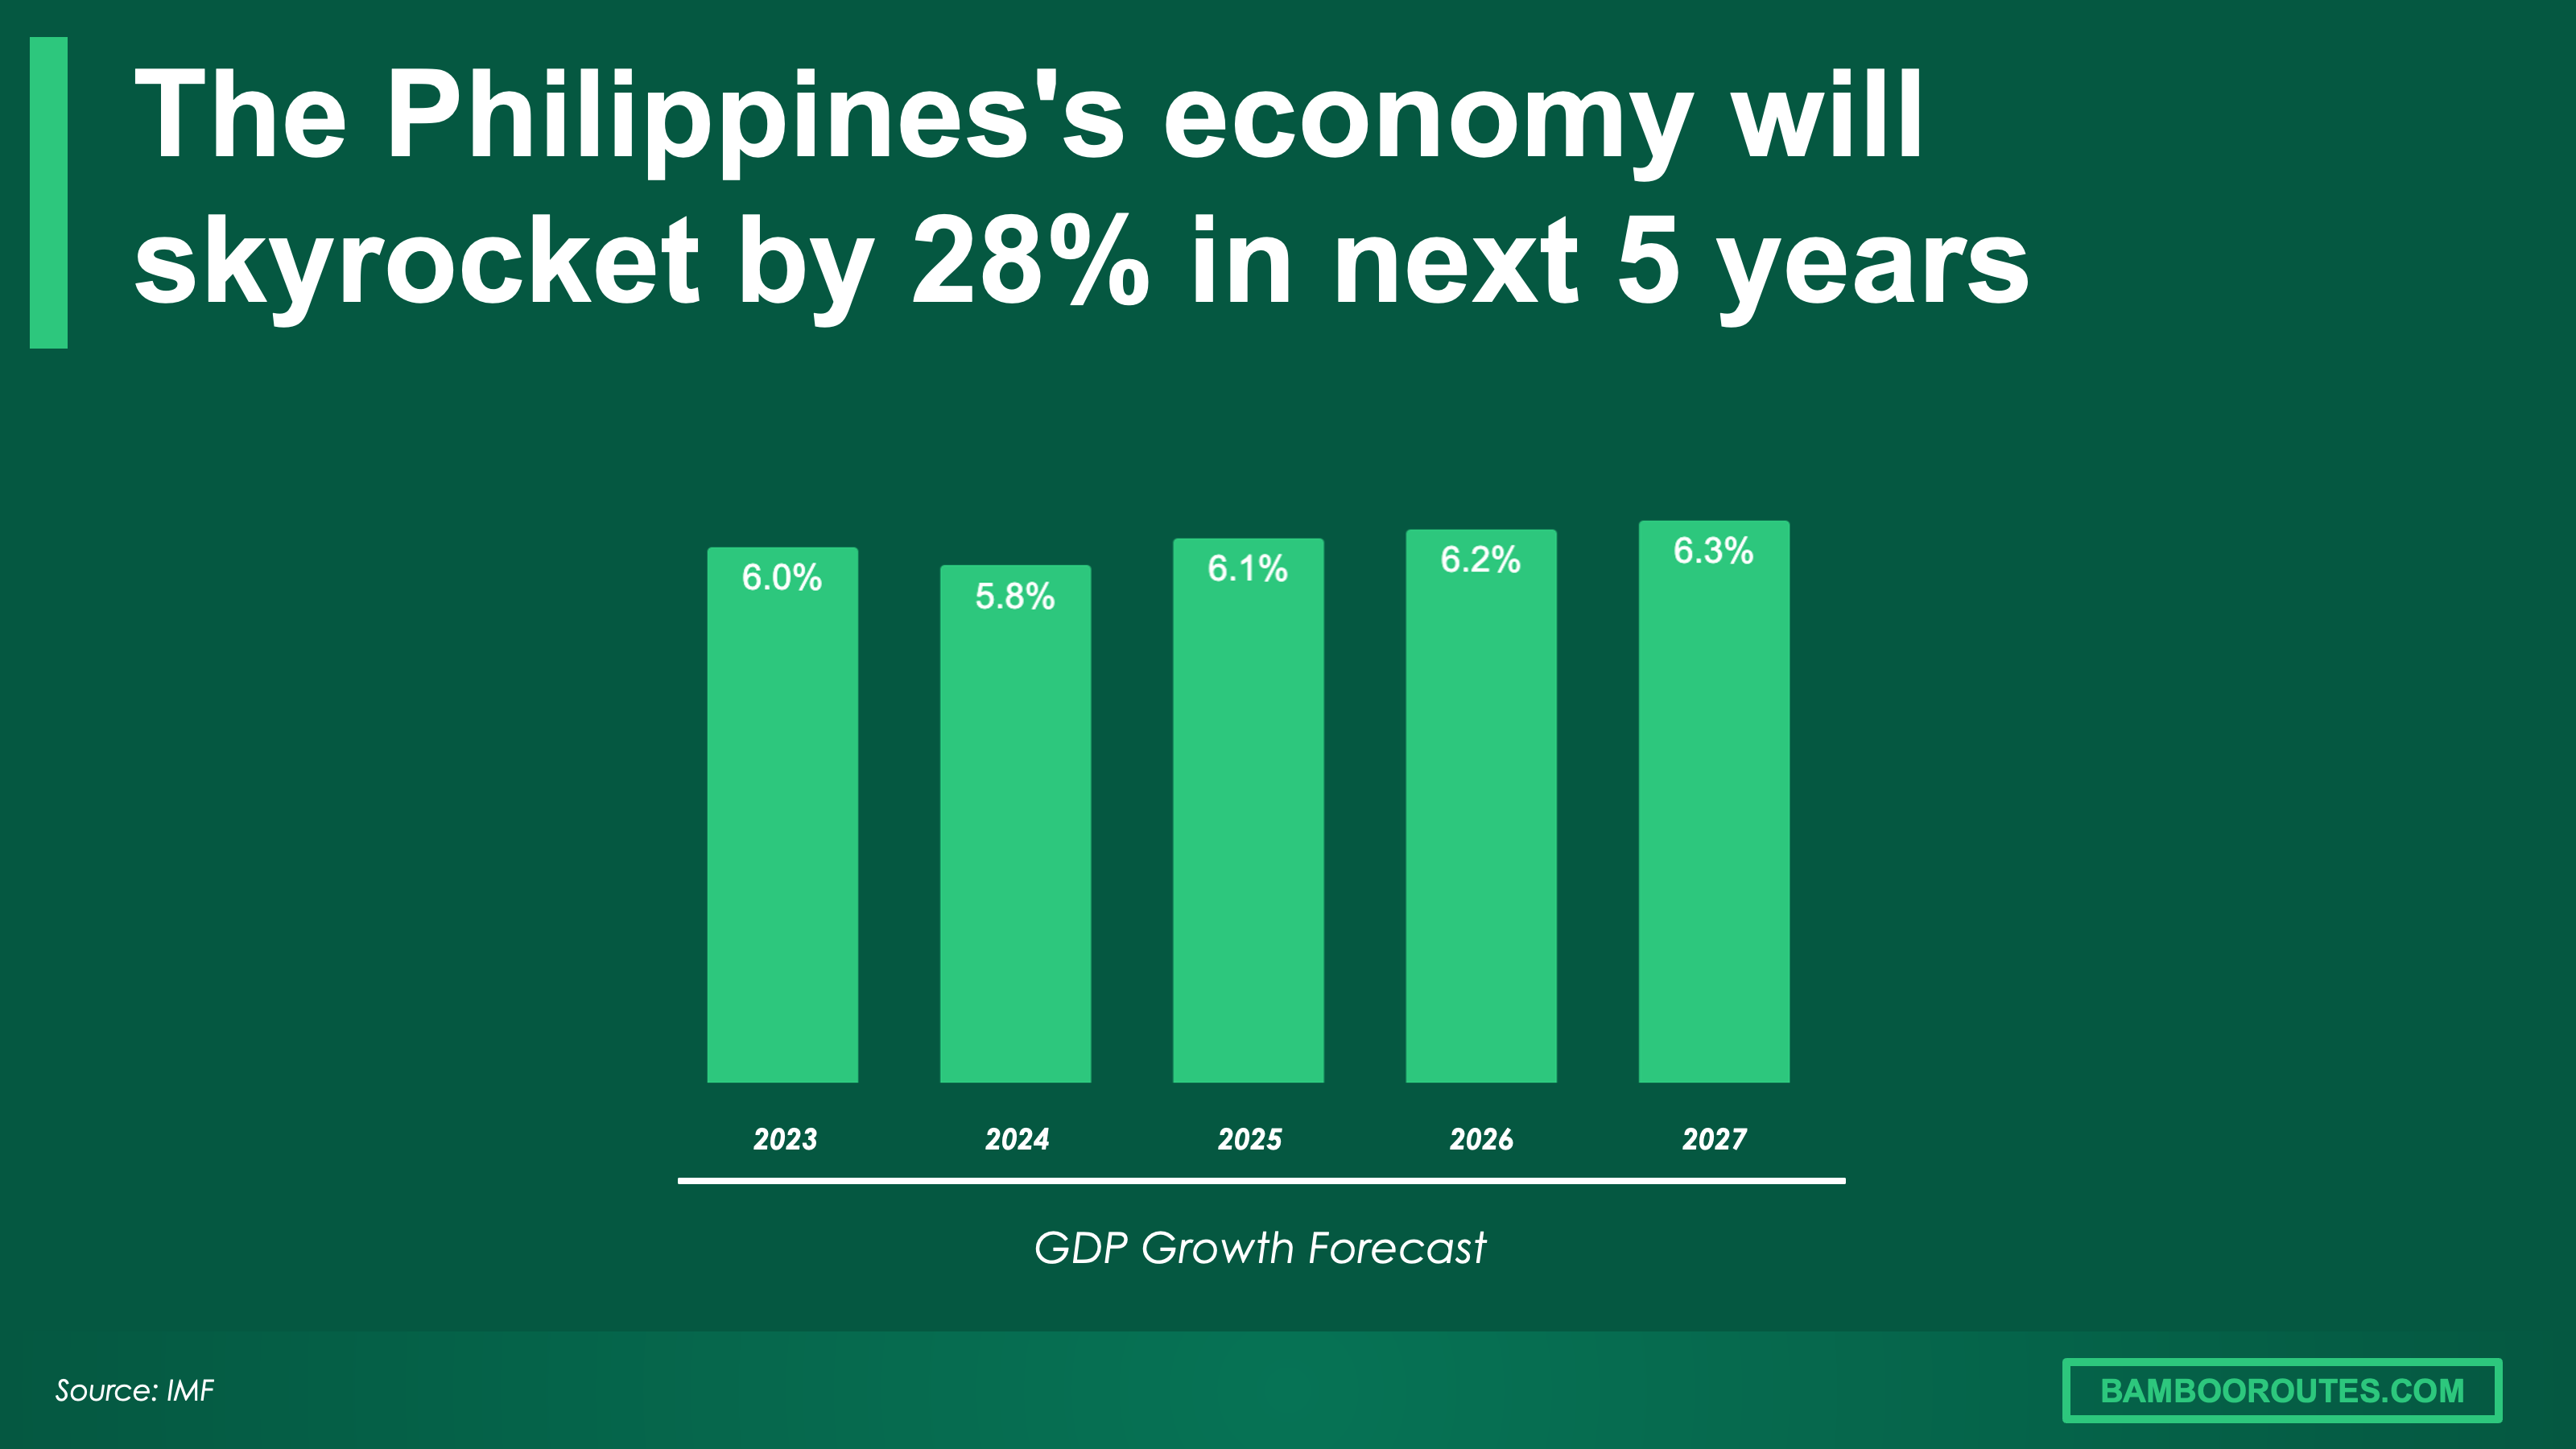 The Philippines gdp growth